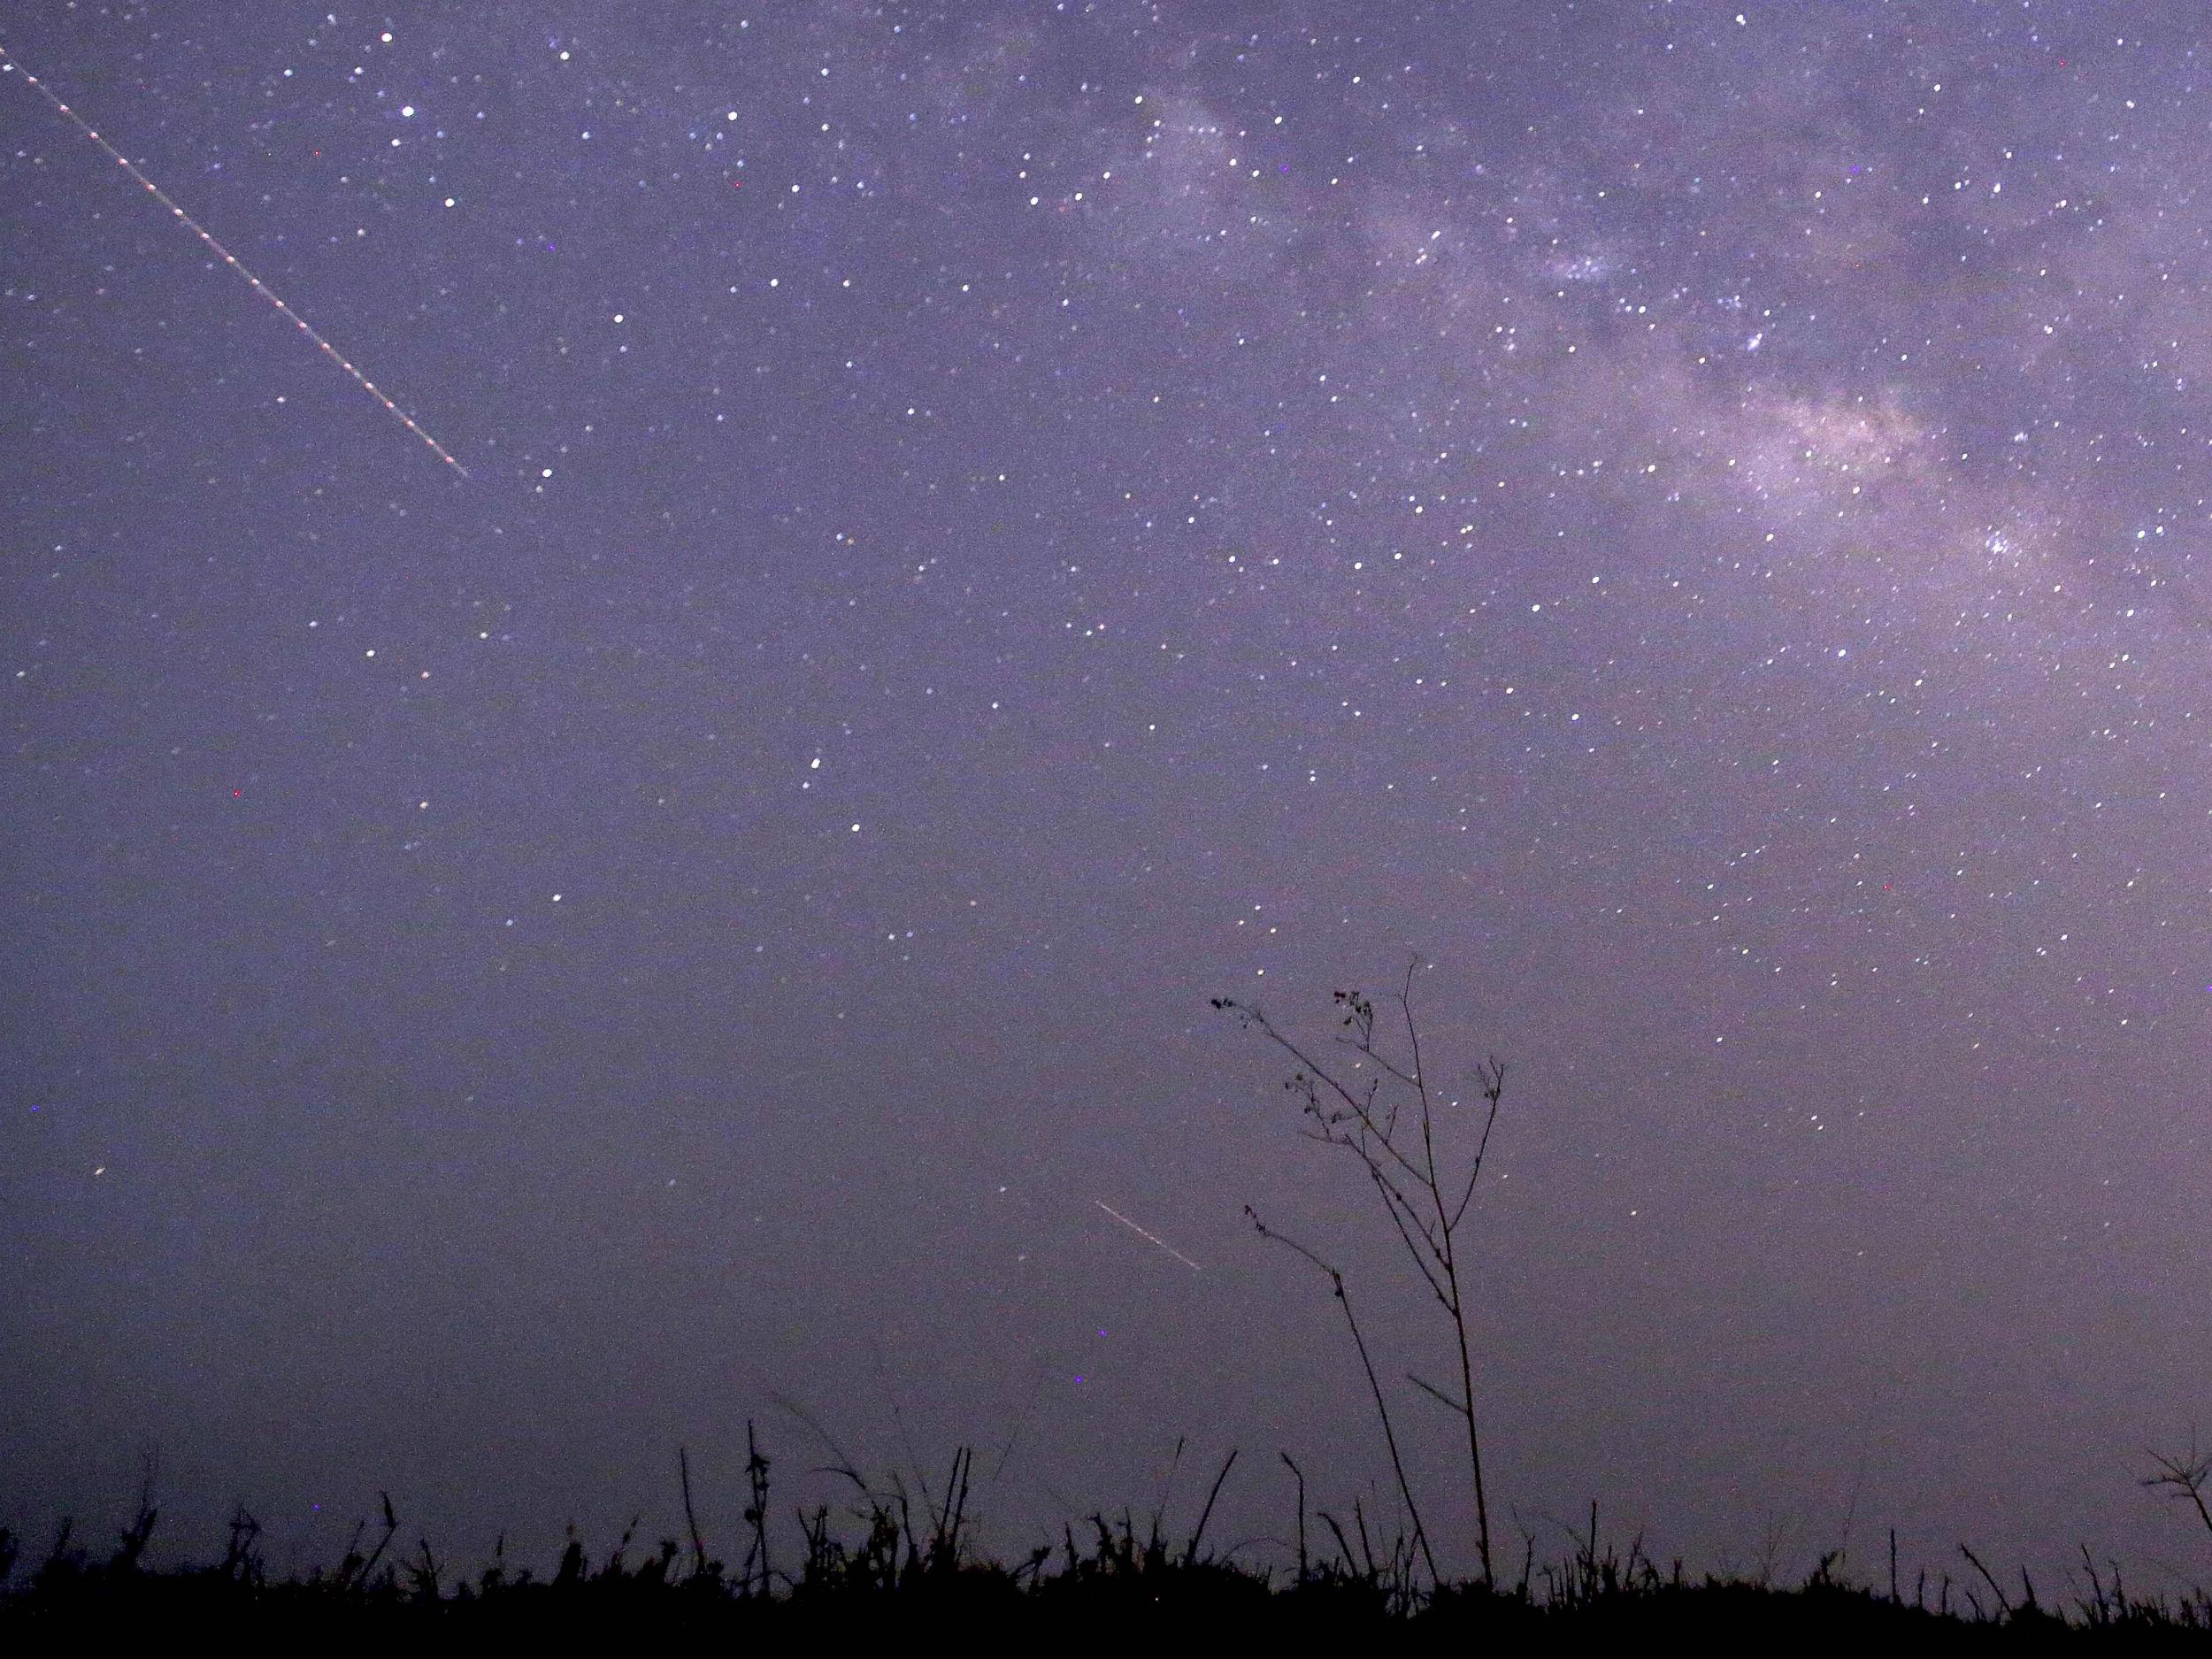 A long-exposure photograph shows the Lyrids meteor shower over Yangon in Myanmar